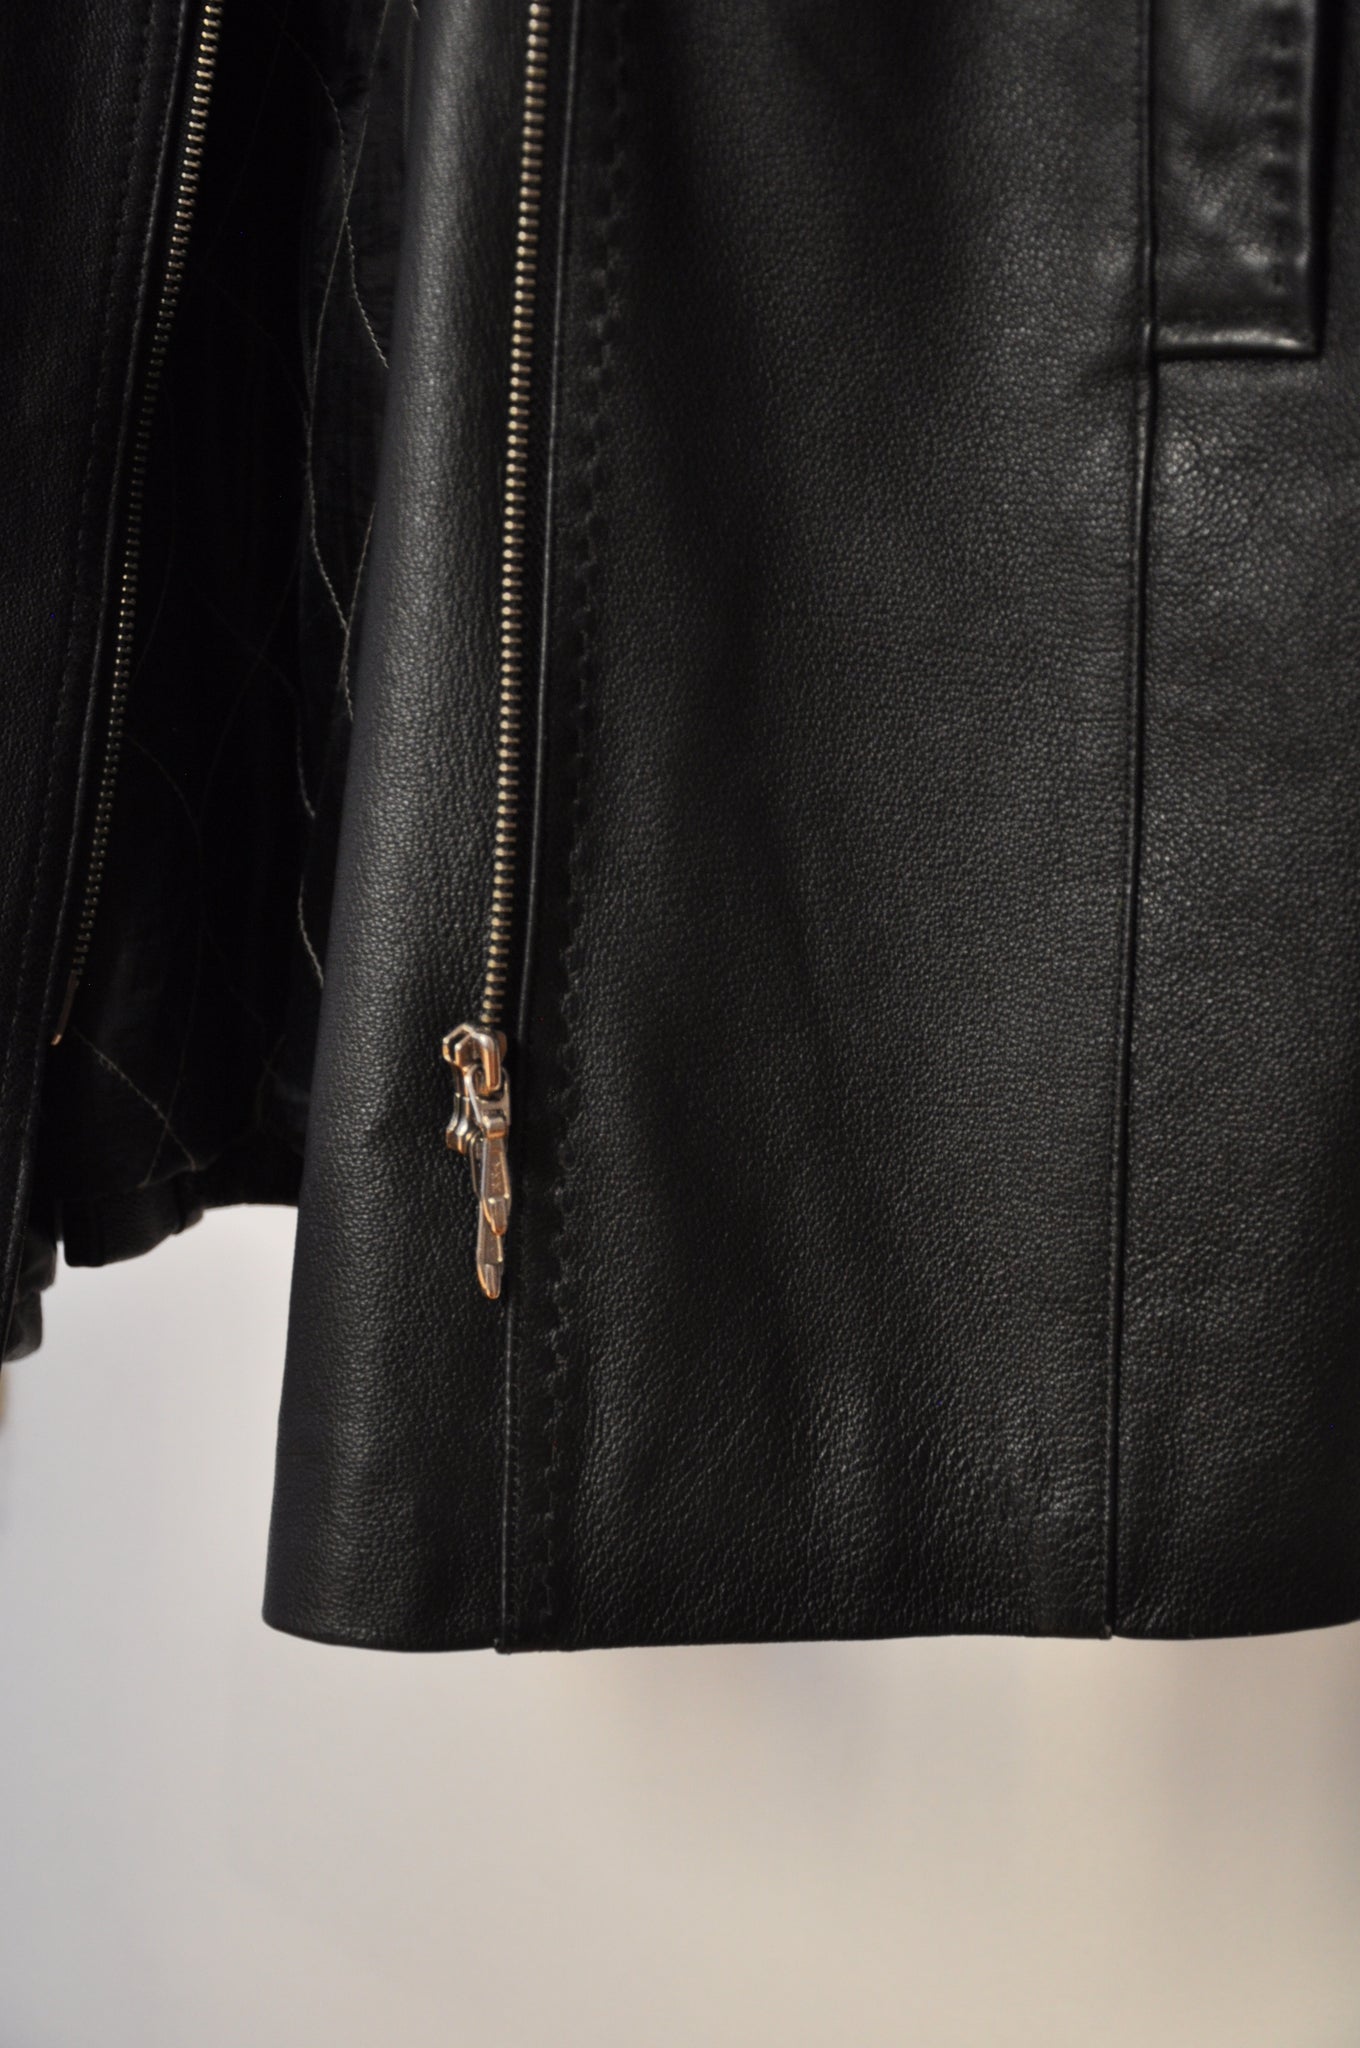 Heavy leather jacket with belt / M-L